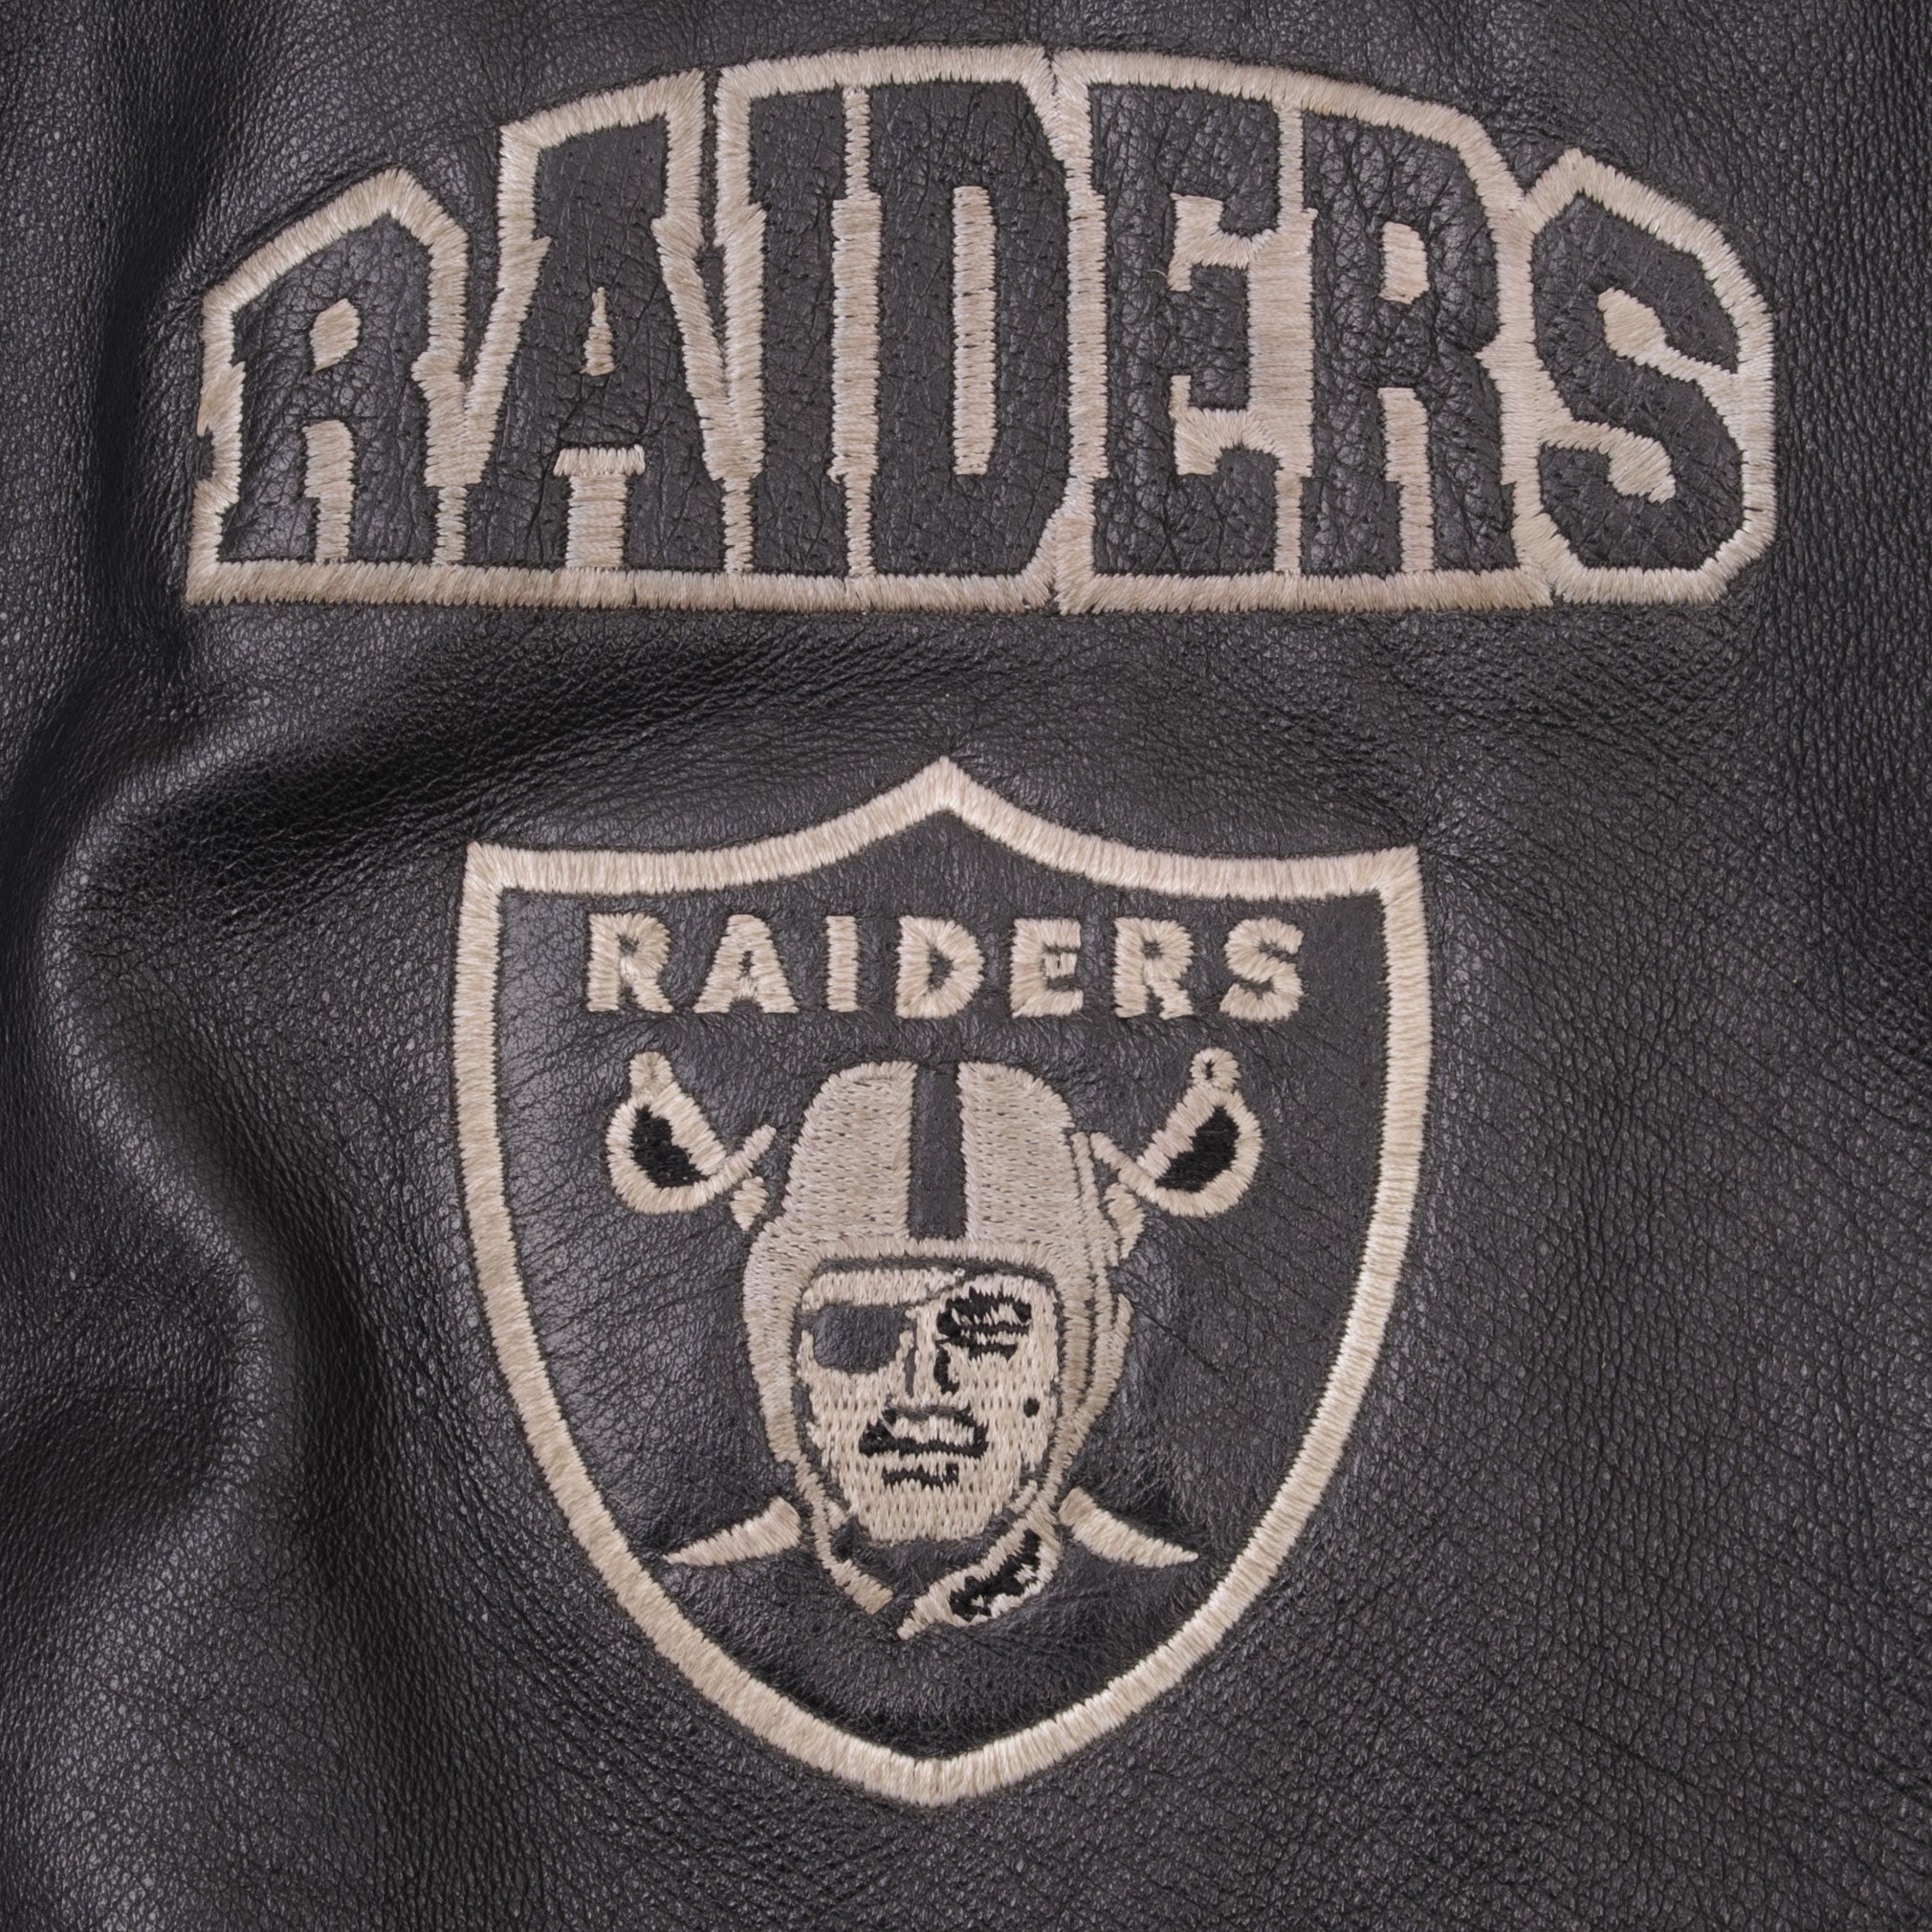 Vintage Los Angeles Raiders Patch Silver and Black with Raiders Logo Used